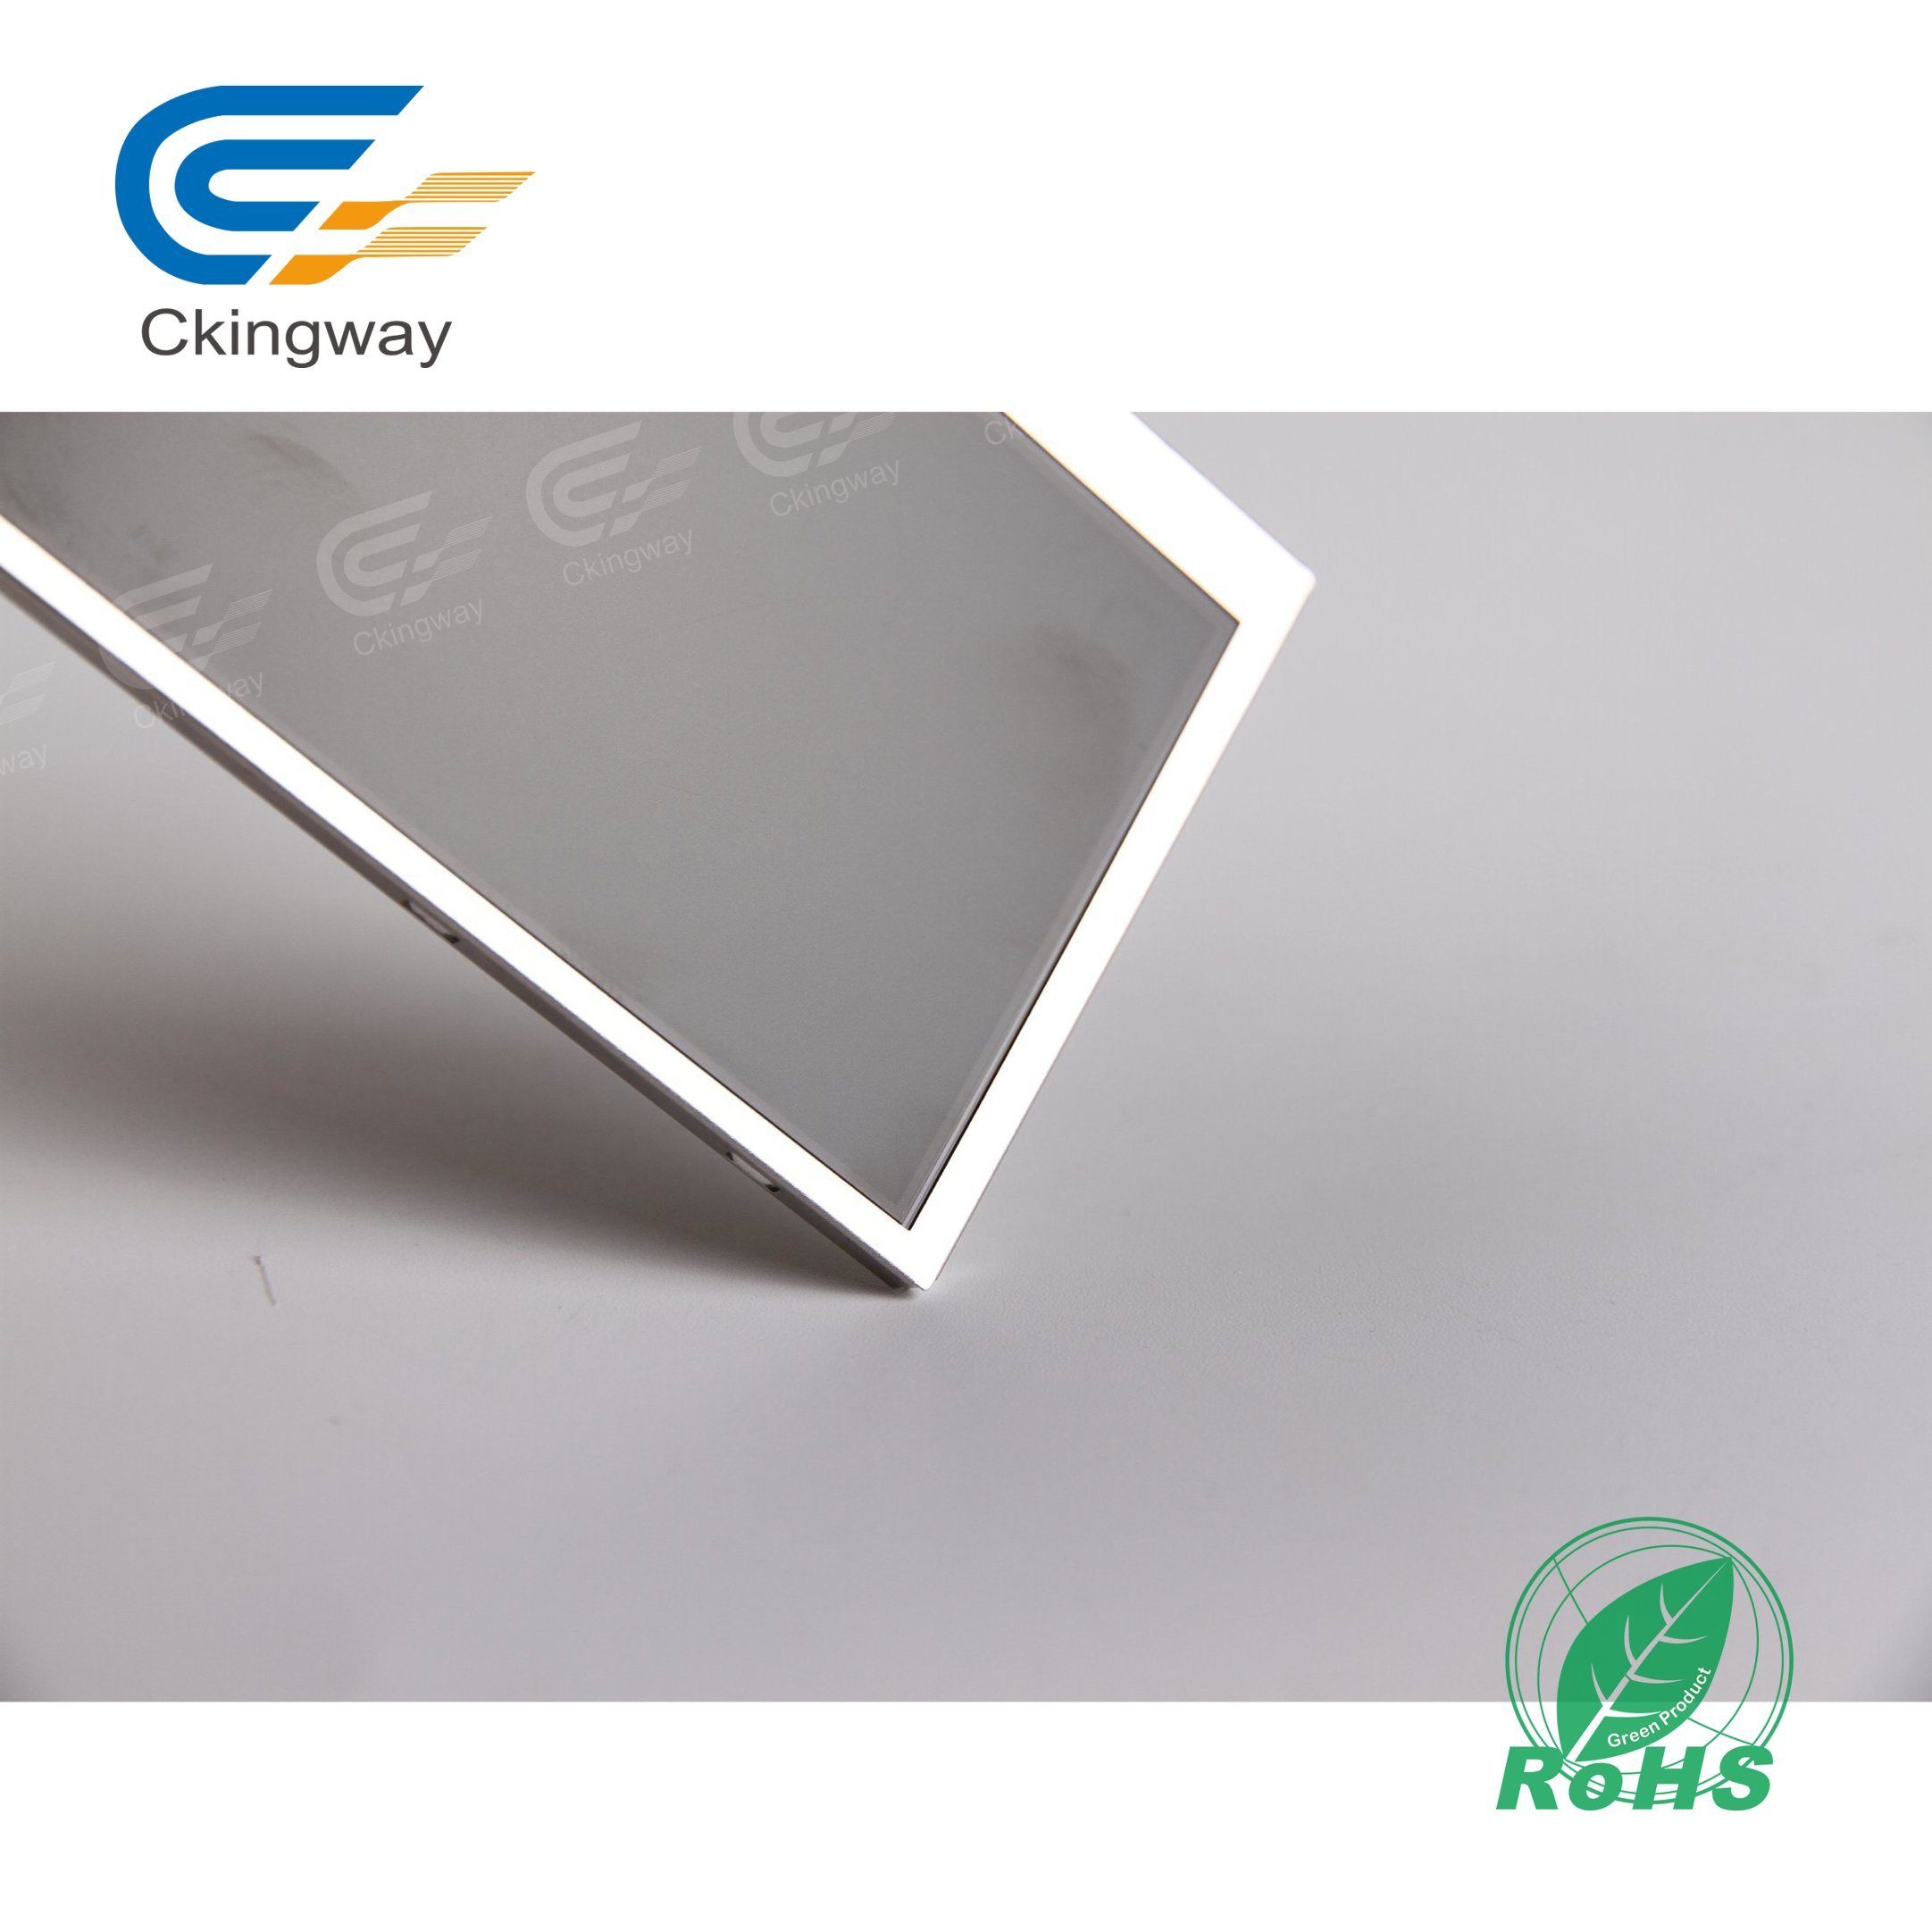 Neutral Product 4.3 Inch TFT with Resistive Touch Panel LCM Display